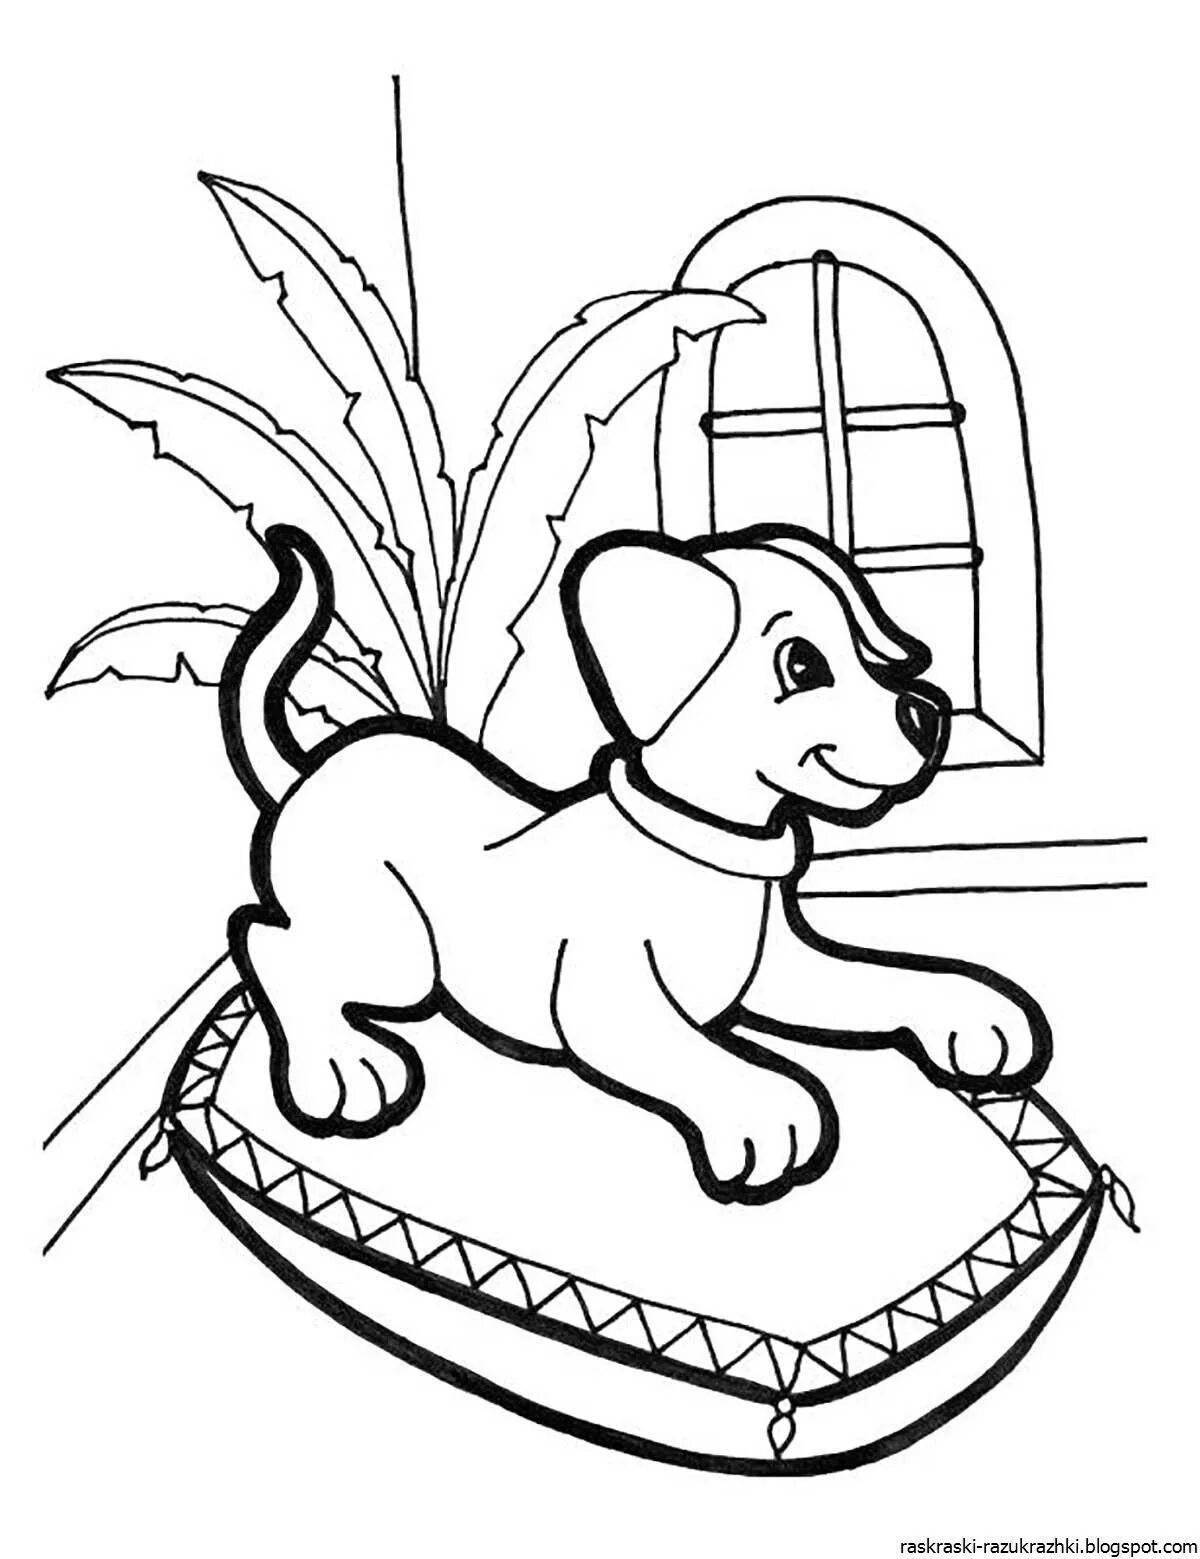 Coloring page friendly cat and dog